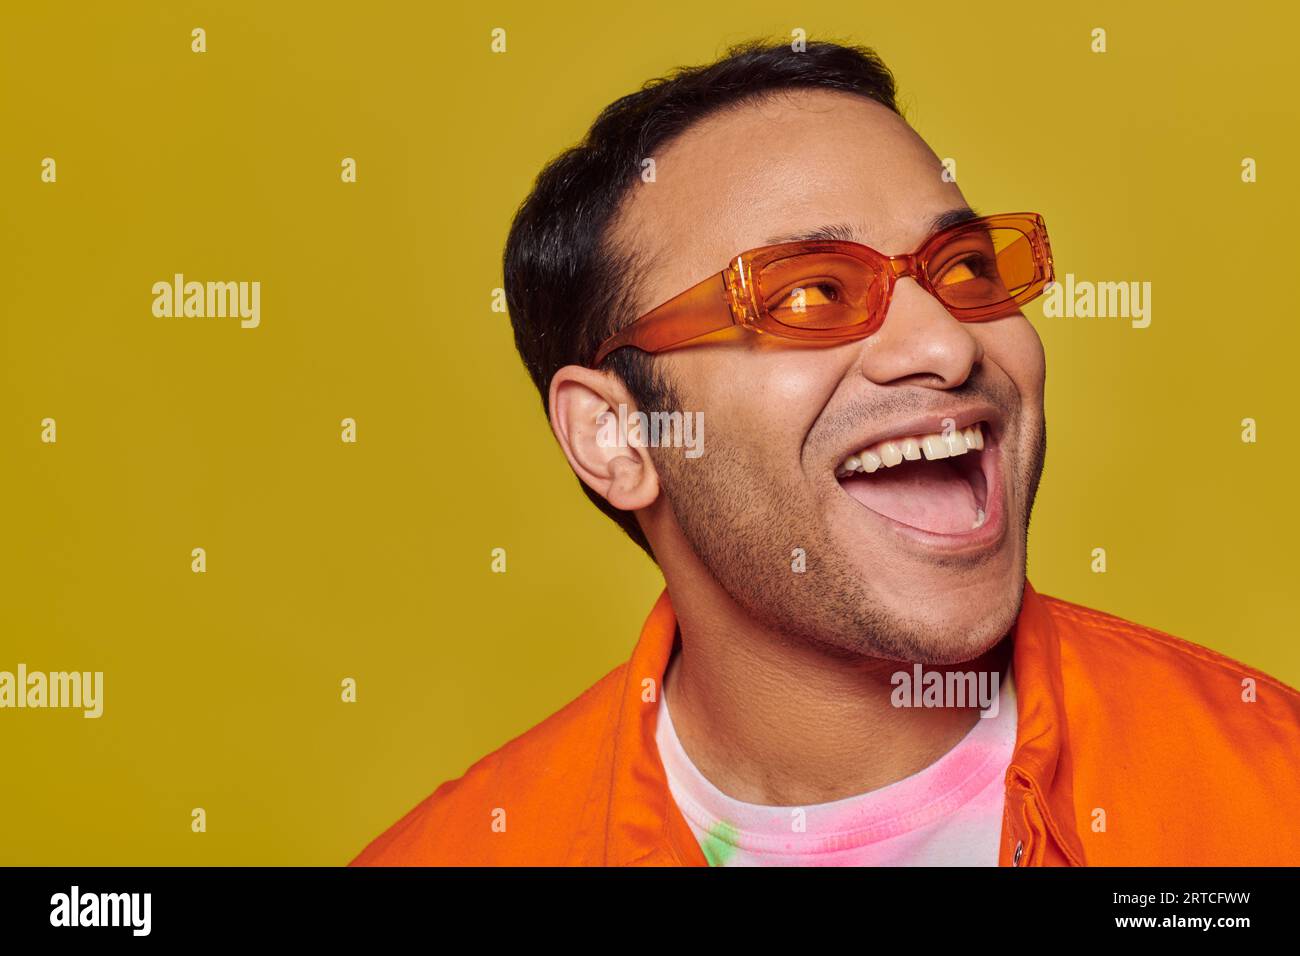 positive indian man in orange sunglasses looking away and smiling on yellow background, side glance Stock Photo